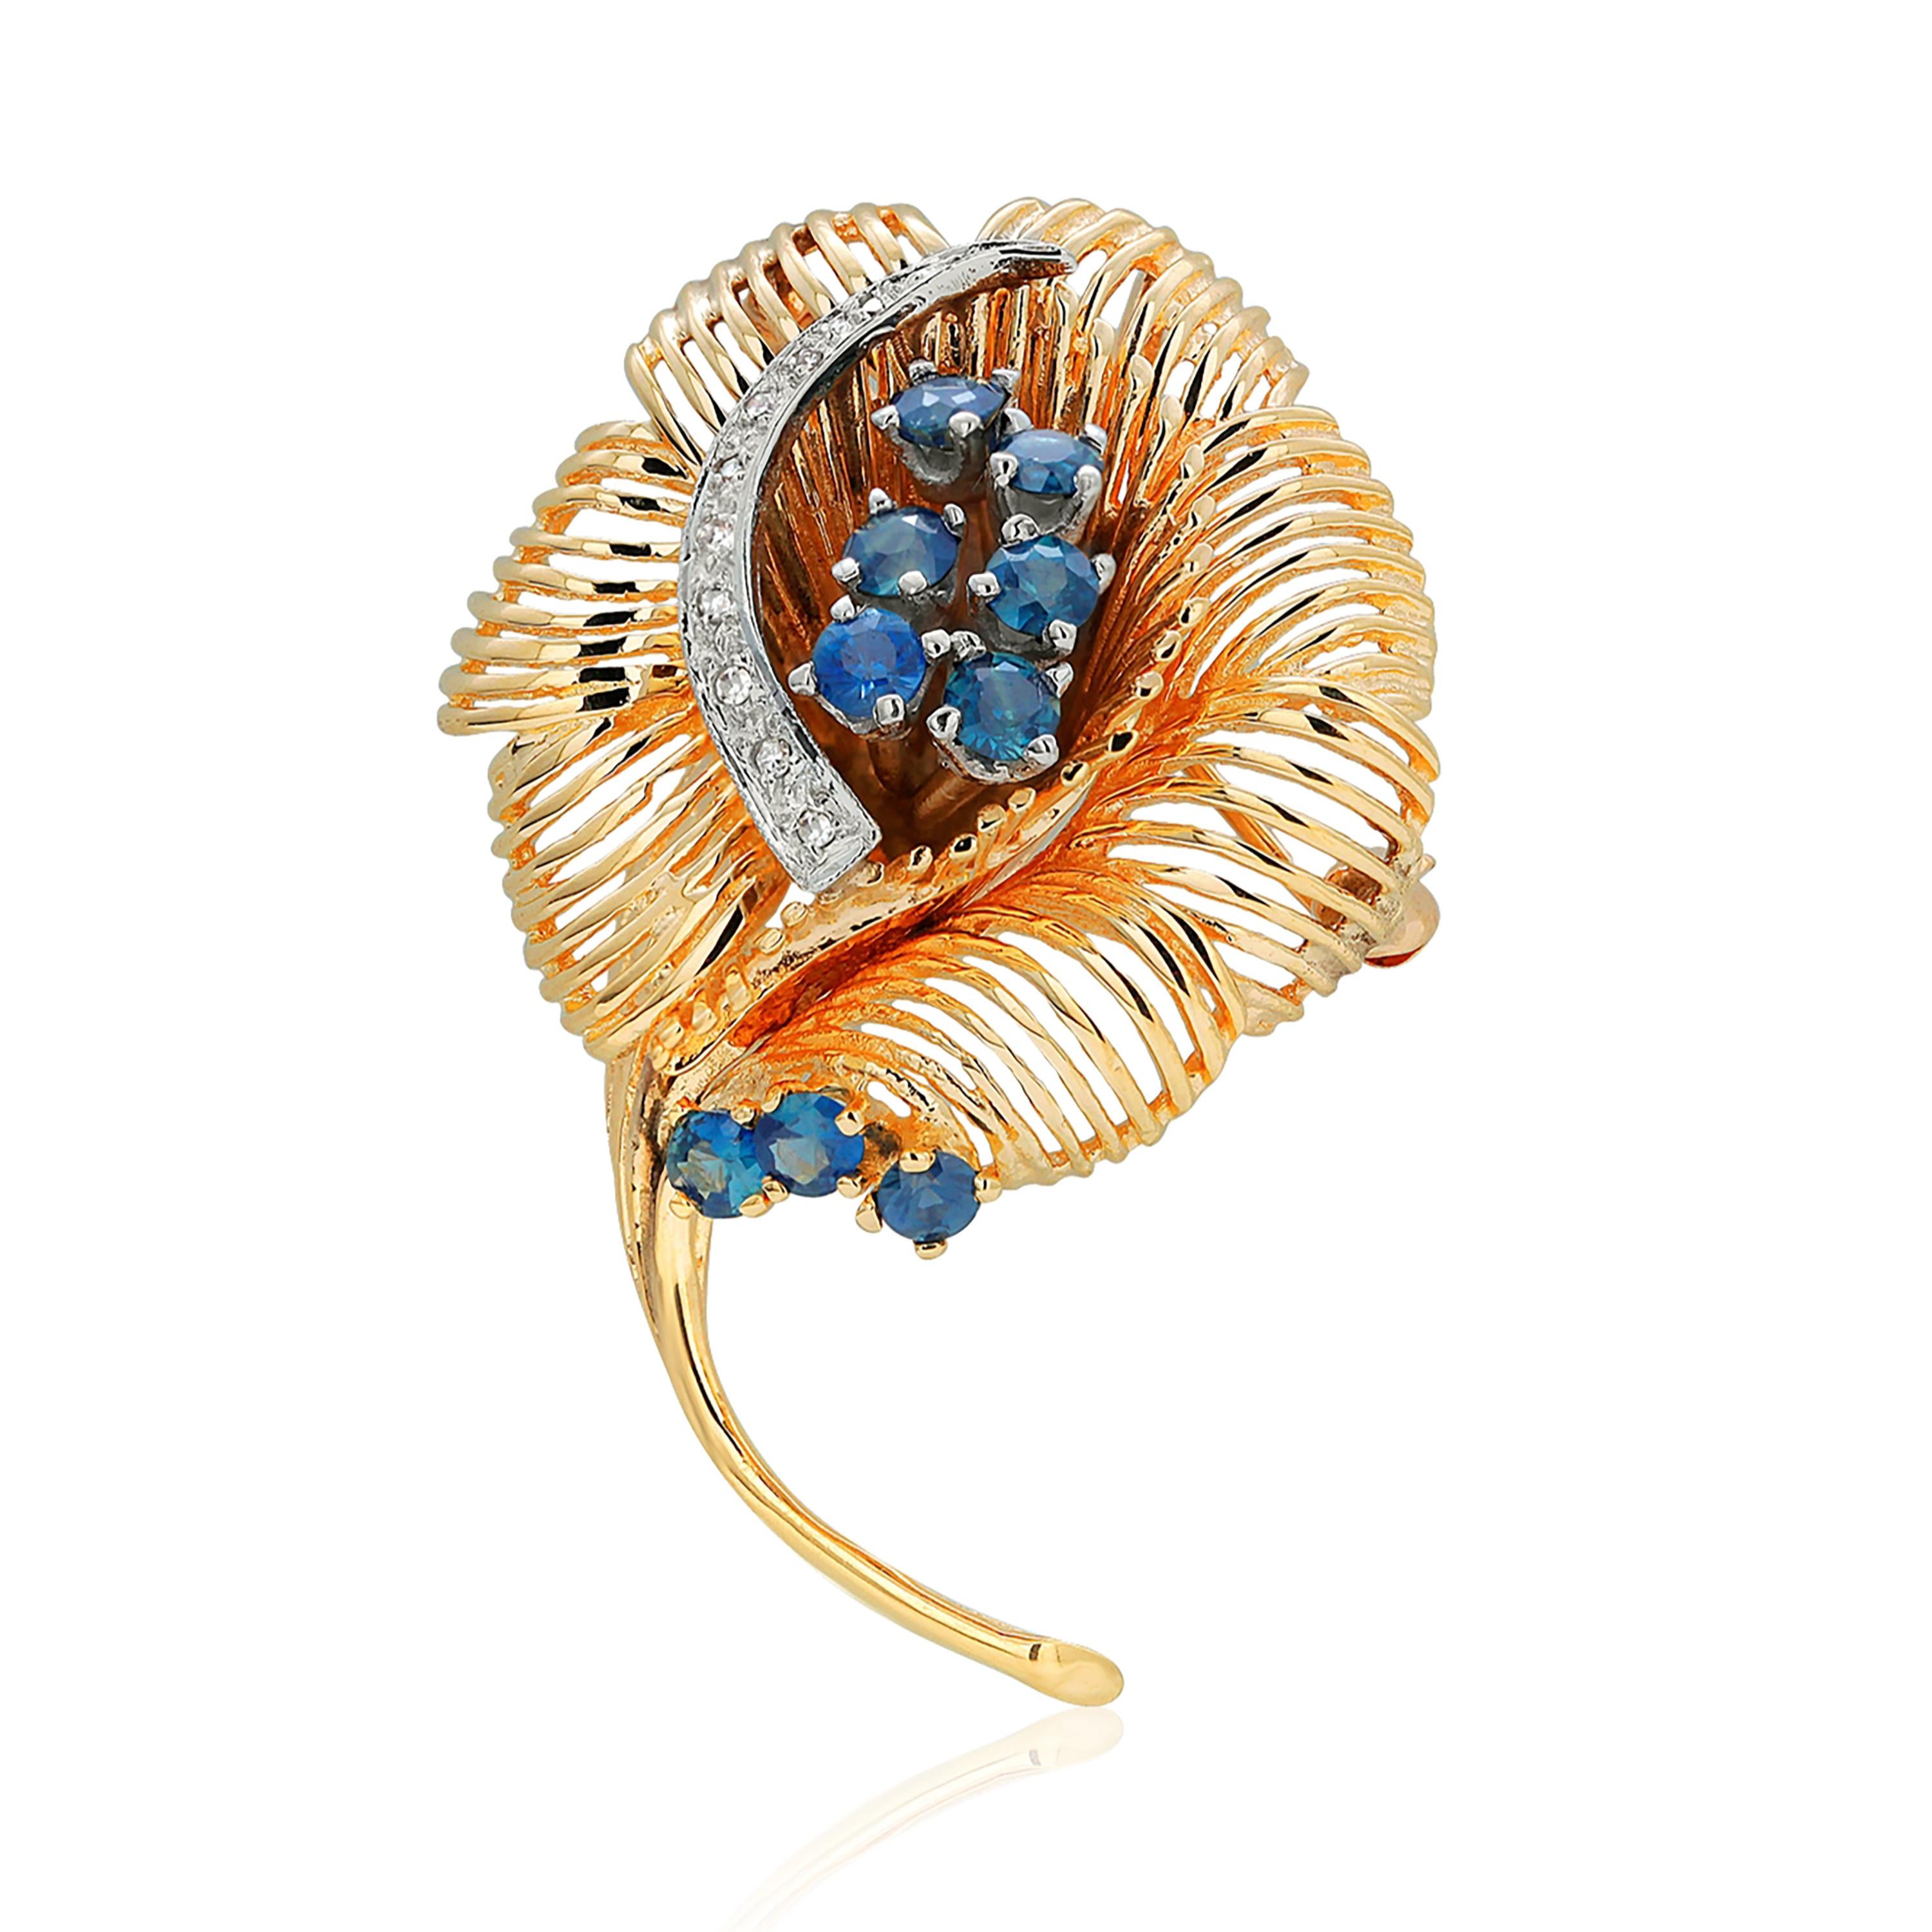 Women's or Men's Fourteen Karat Yellow Gold Floral Brooch Pendant with Diamonds and Sapphires